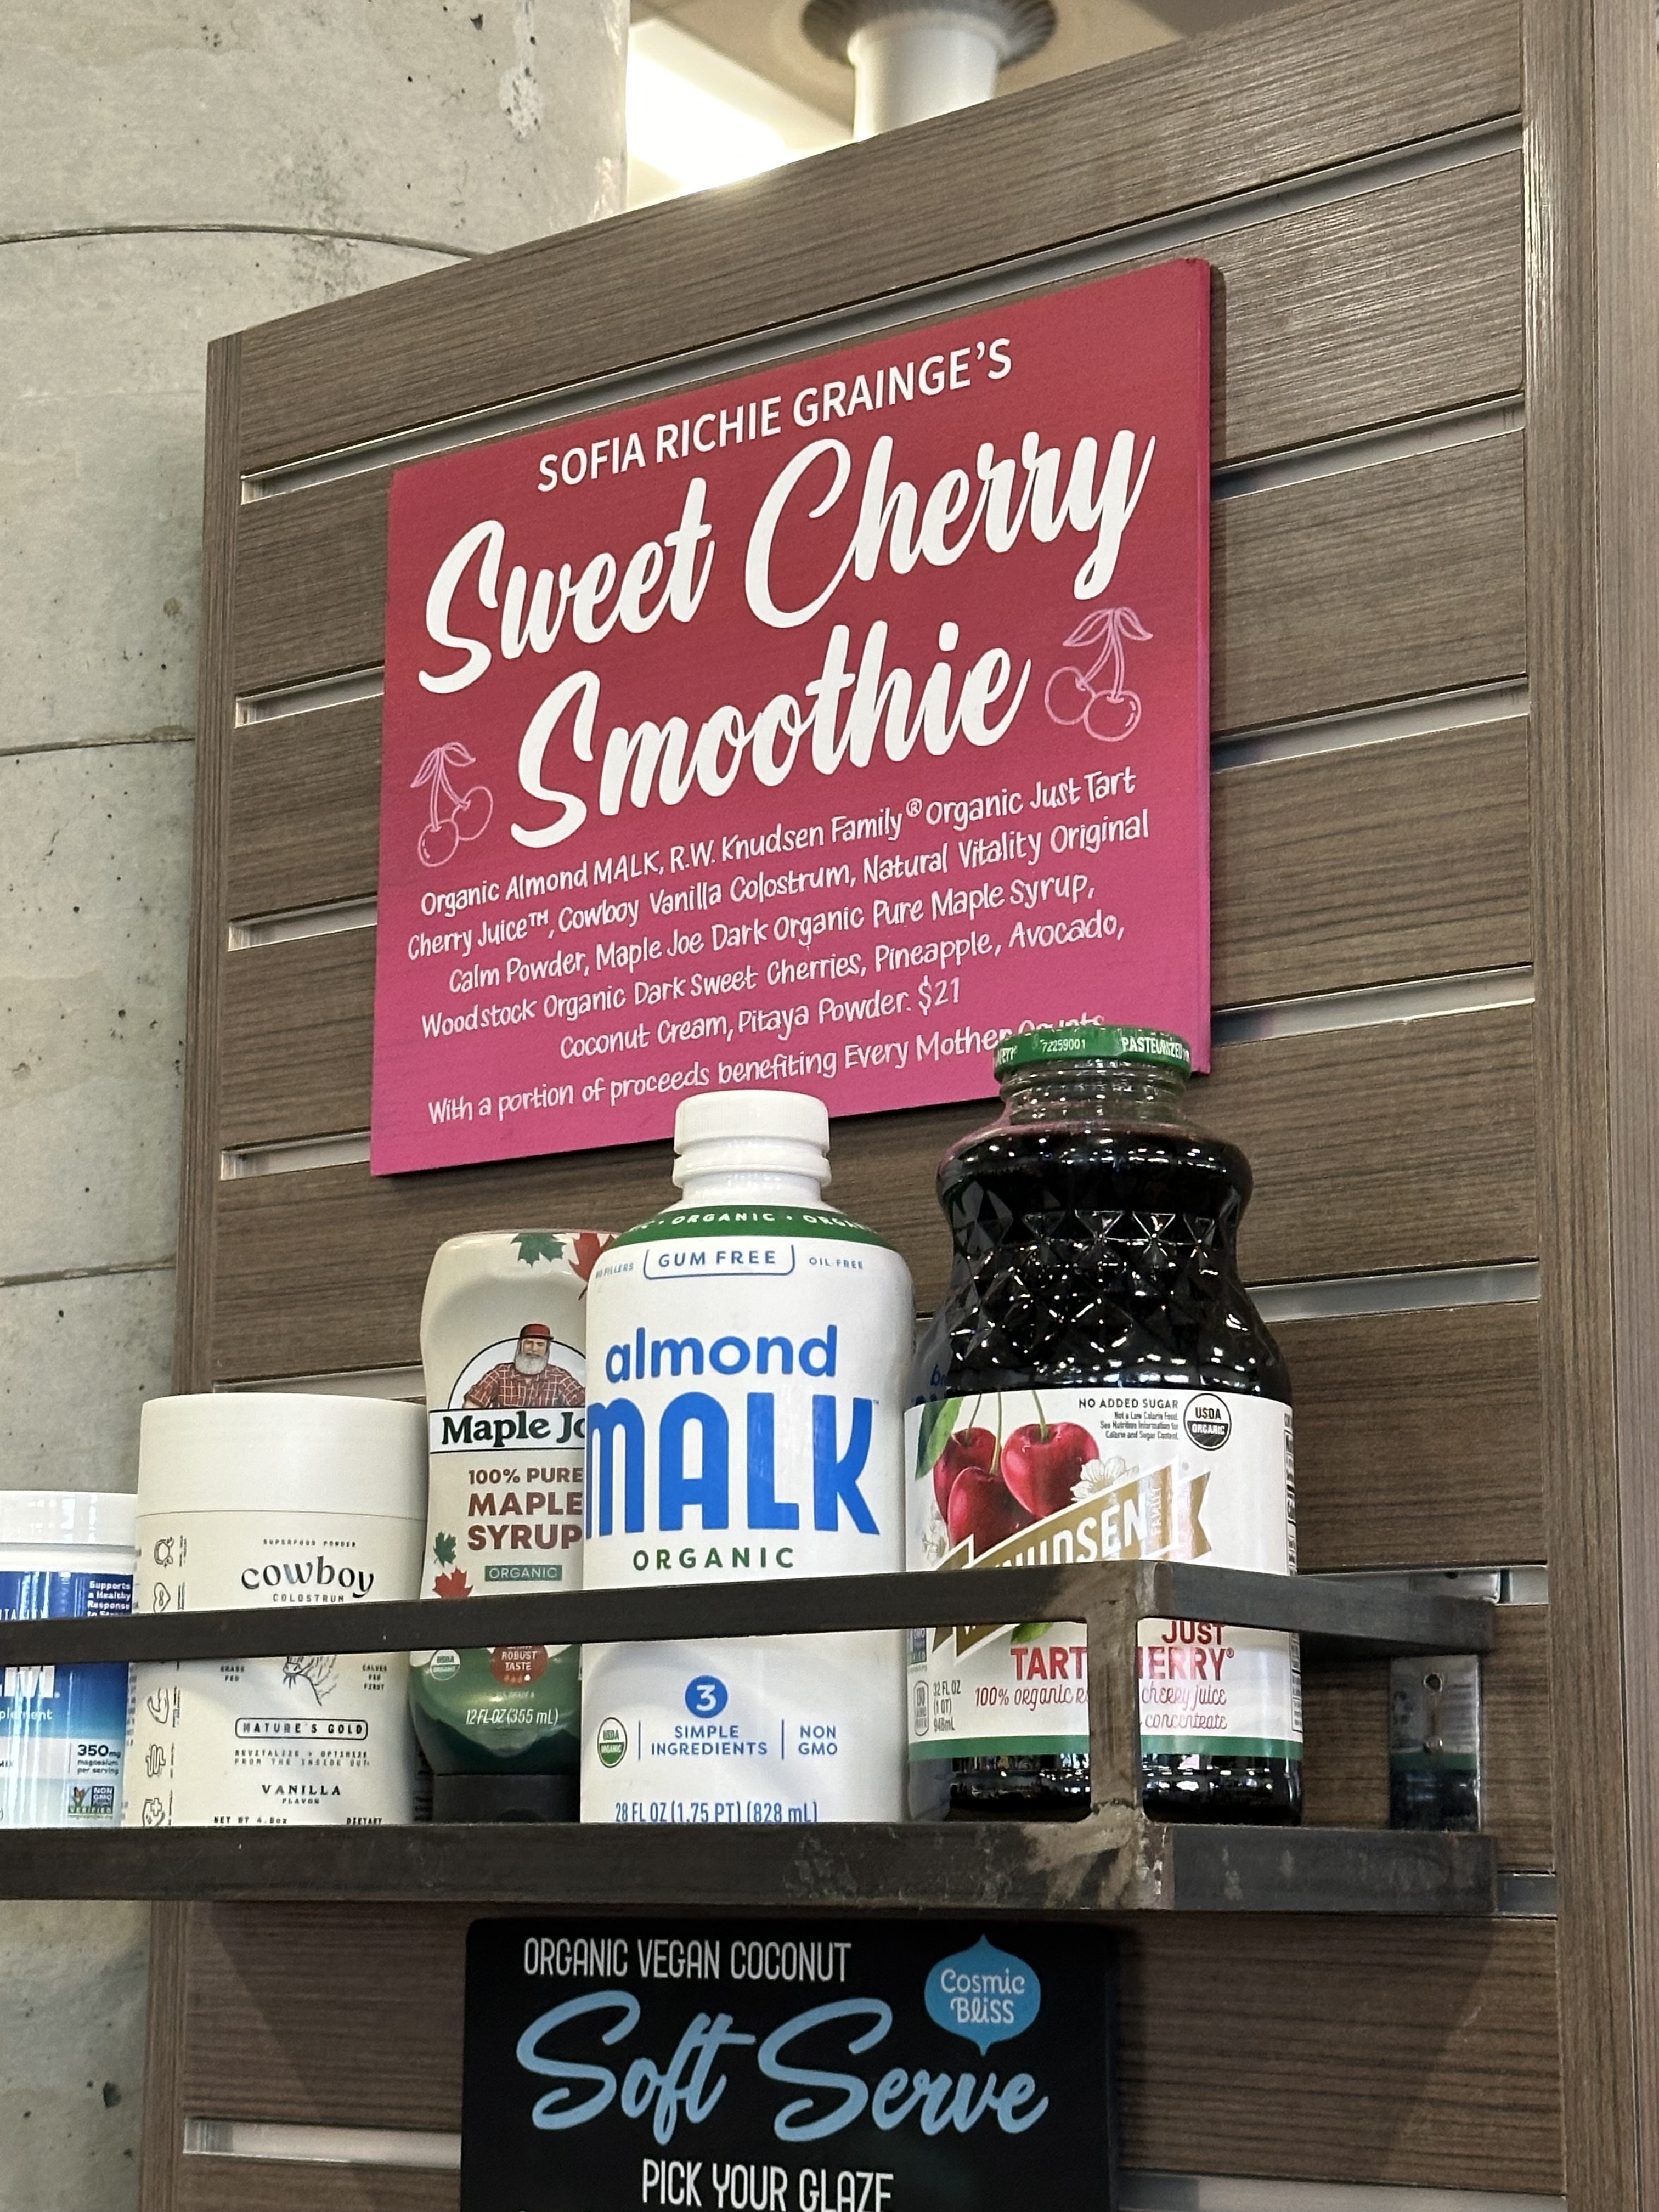 Shelf with various organic food products under a pink sign reading &quot;SOFIA RICHIE GRAINGE&#x27;S Sweet Smoothie Cherry Smoothie.&quot;